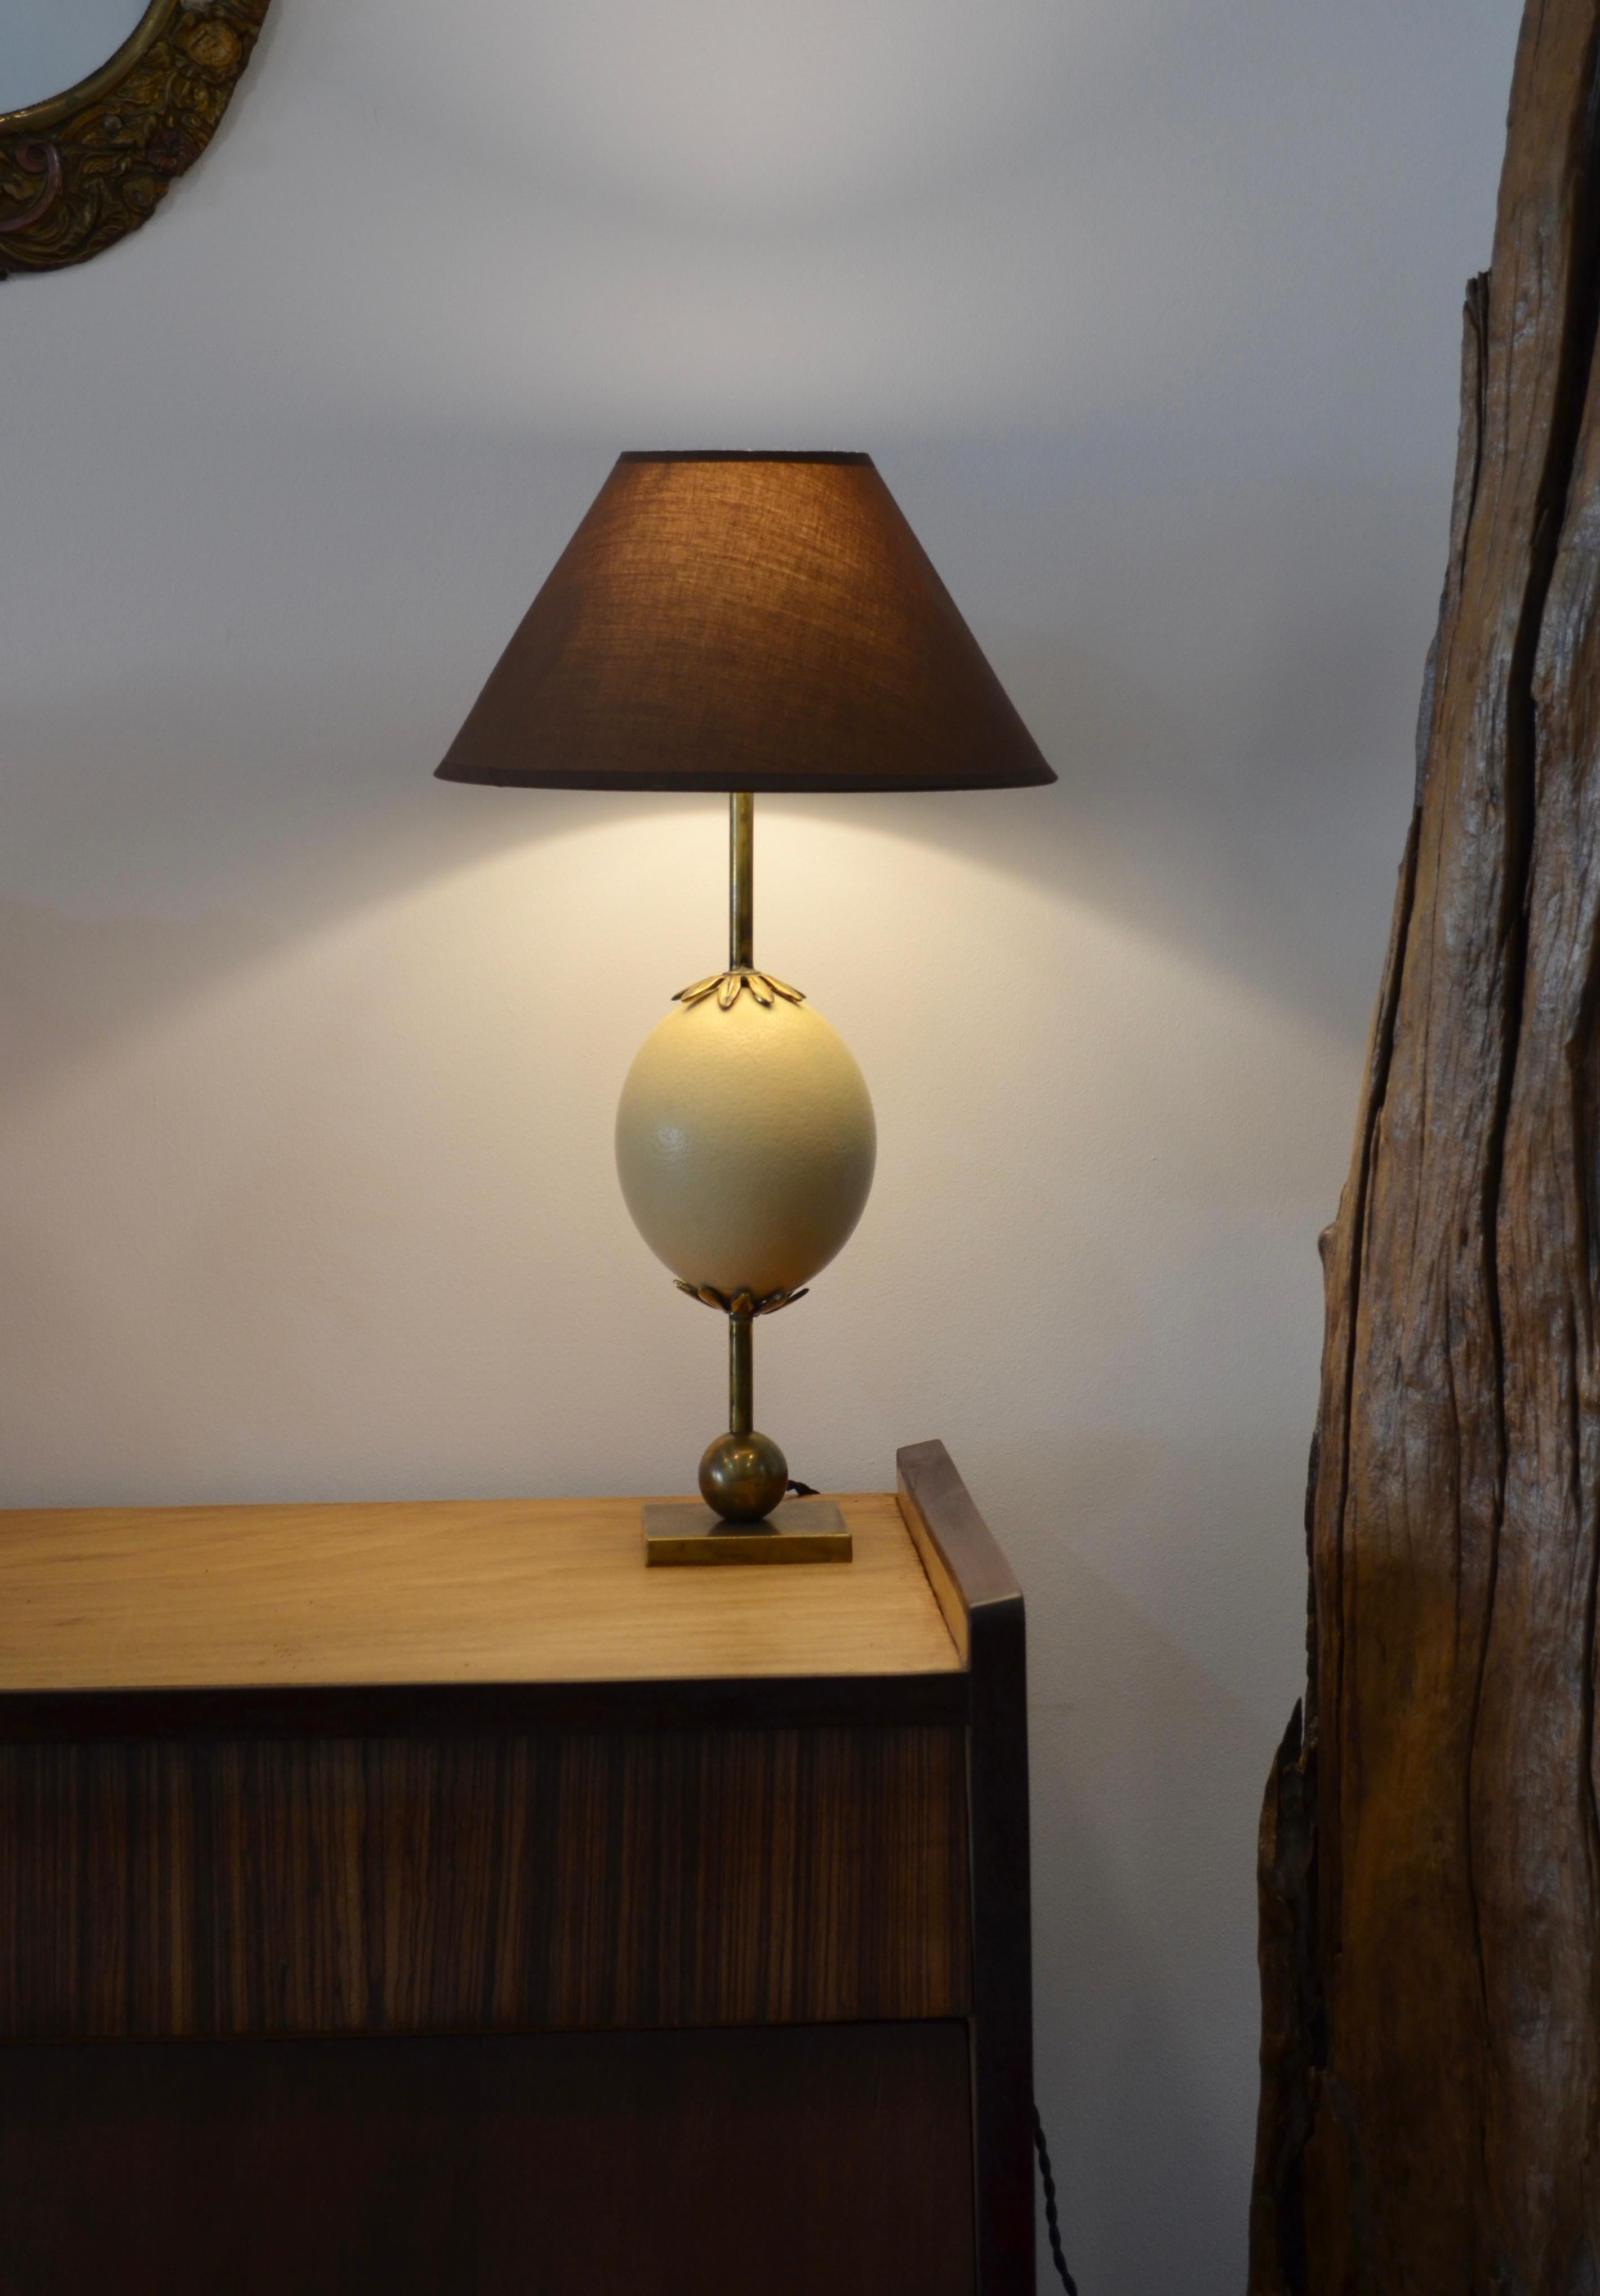 Elegant brass lamp composed of an ostrich egg topped with a bronze collar
some shades of white on the egg.
For sale without lampshade